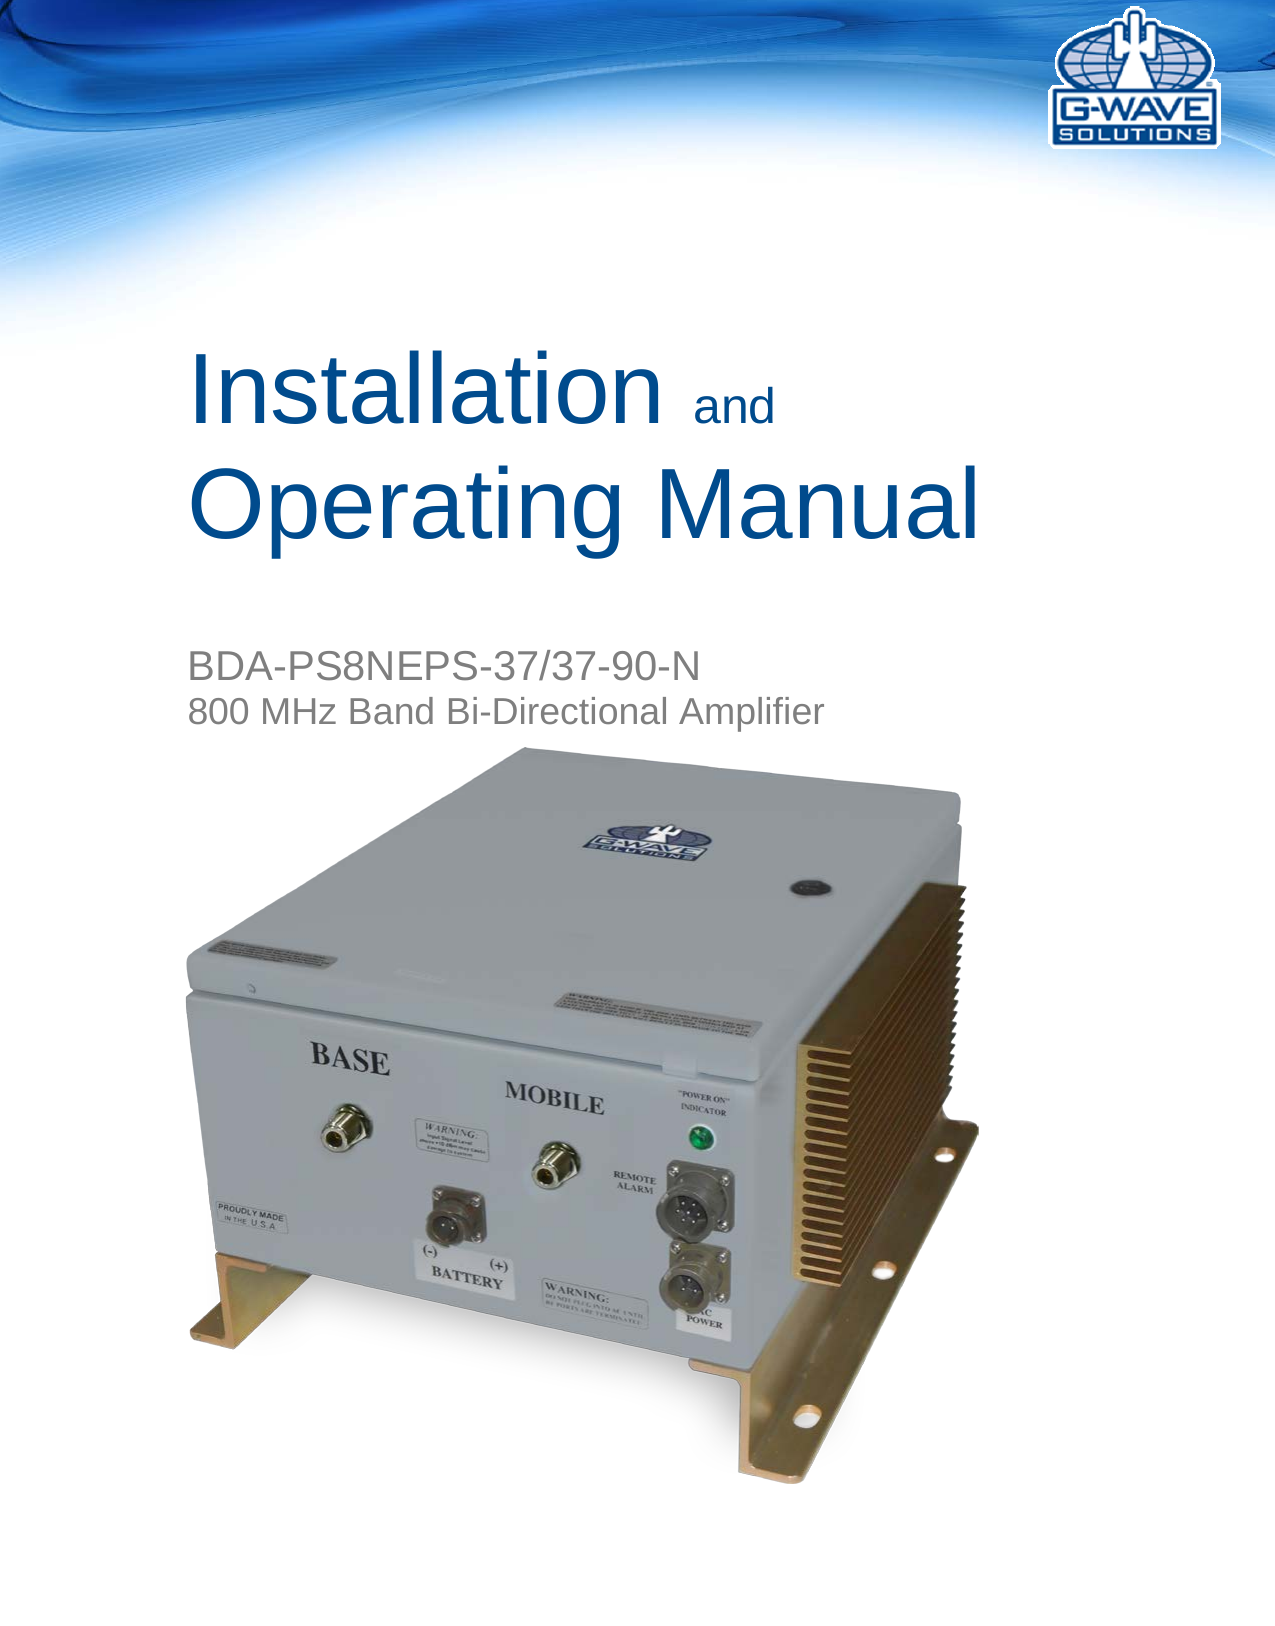       Installation and Operating Manual    BDA-PS8NEPS-37/37-90-N 800 MHz Band Bi-Directional Amplifier    